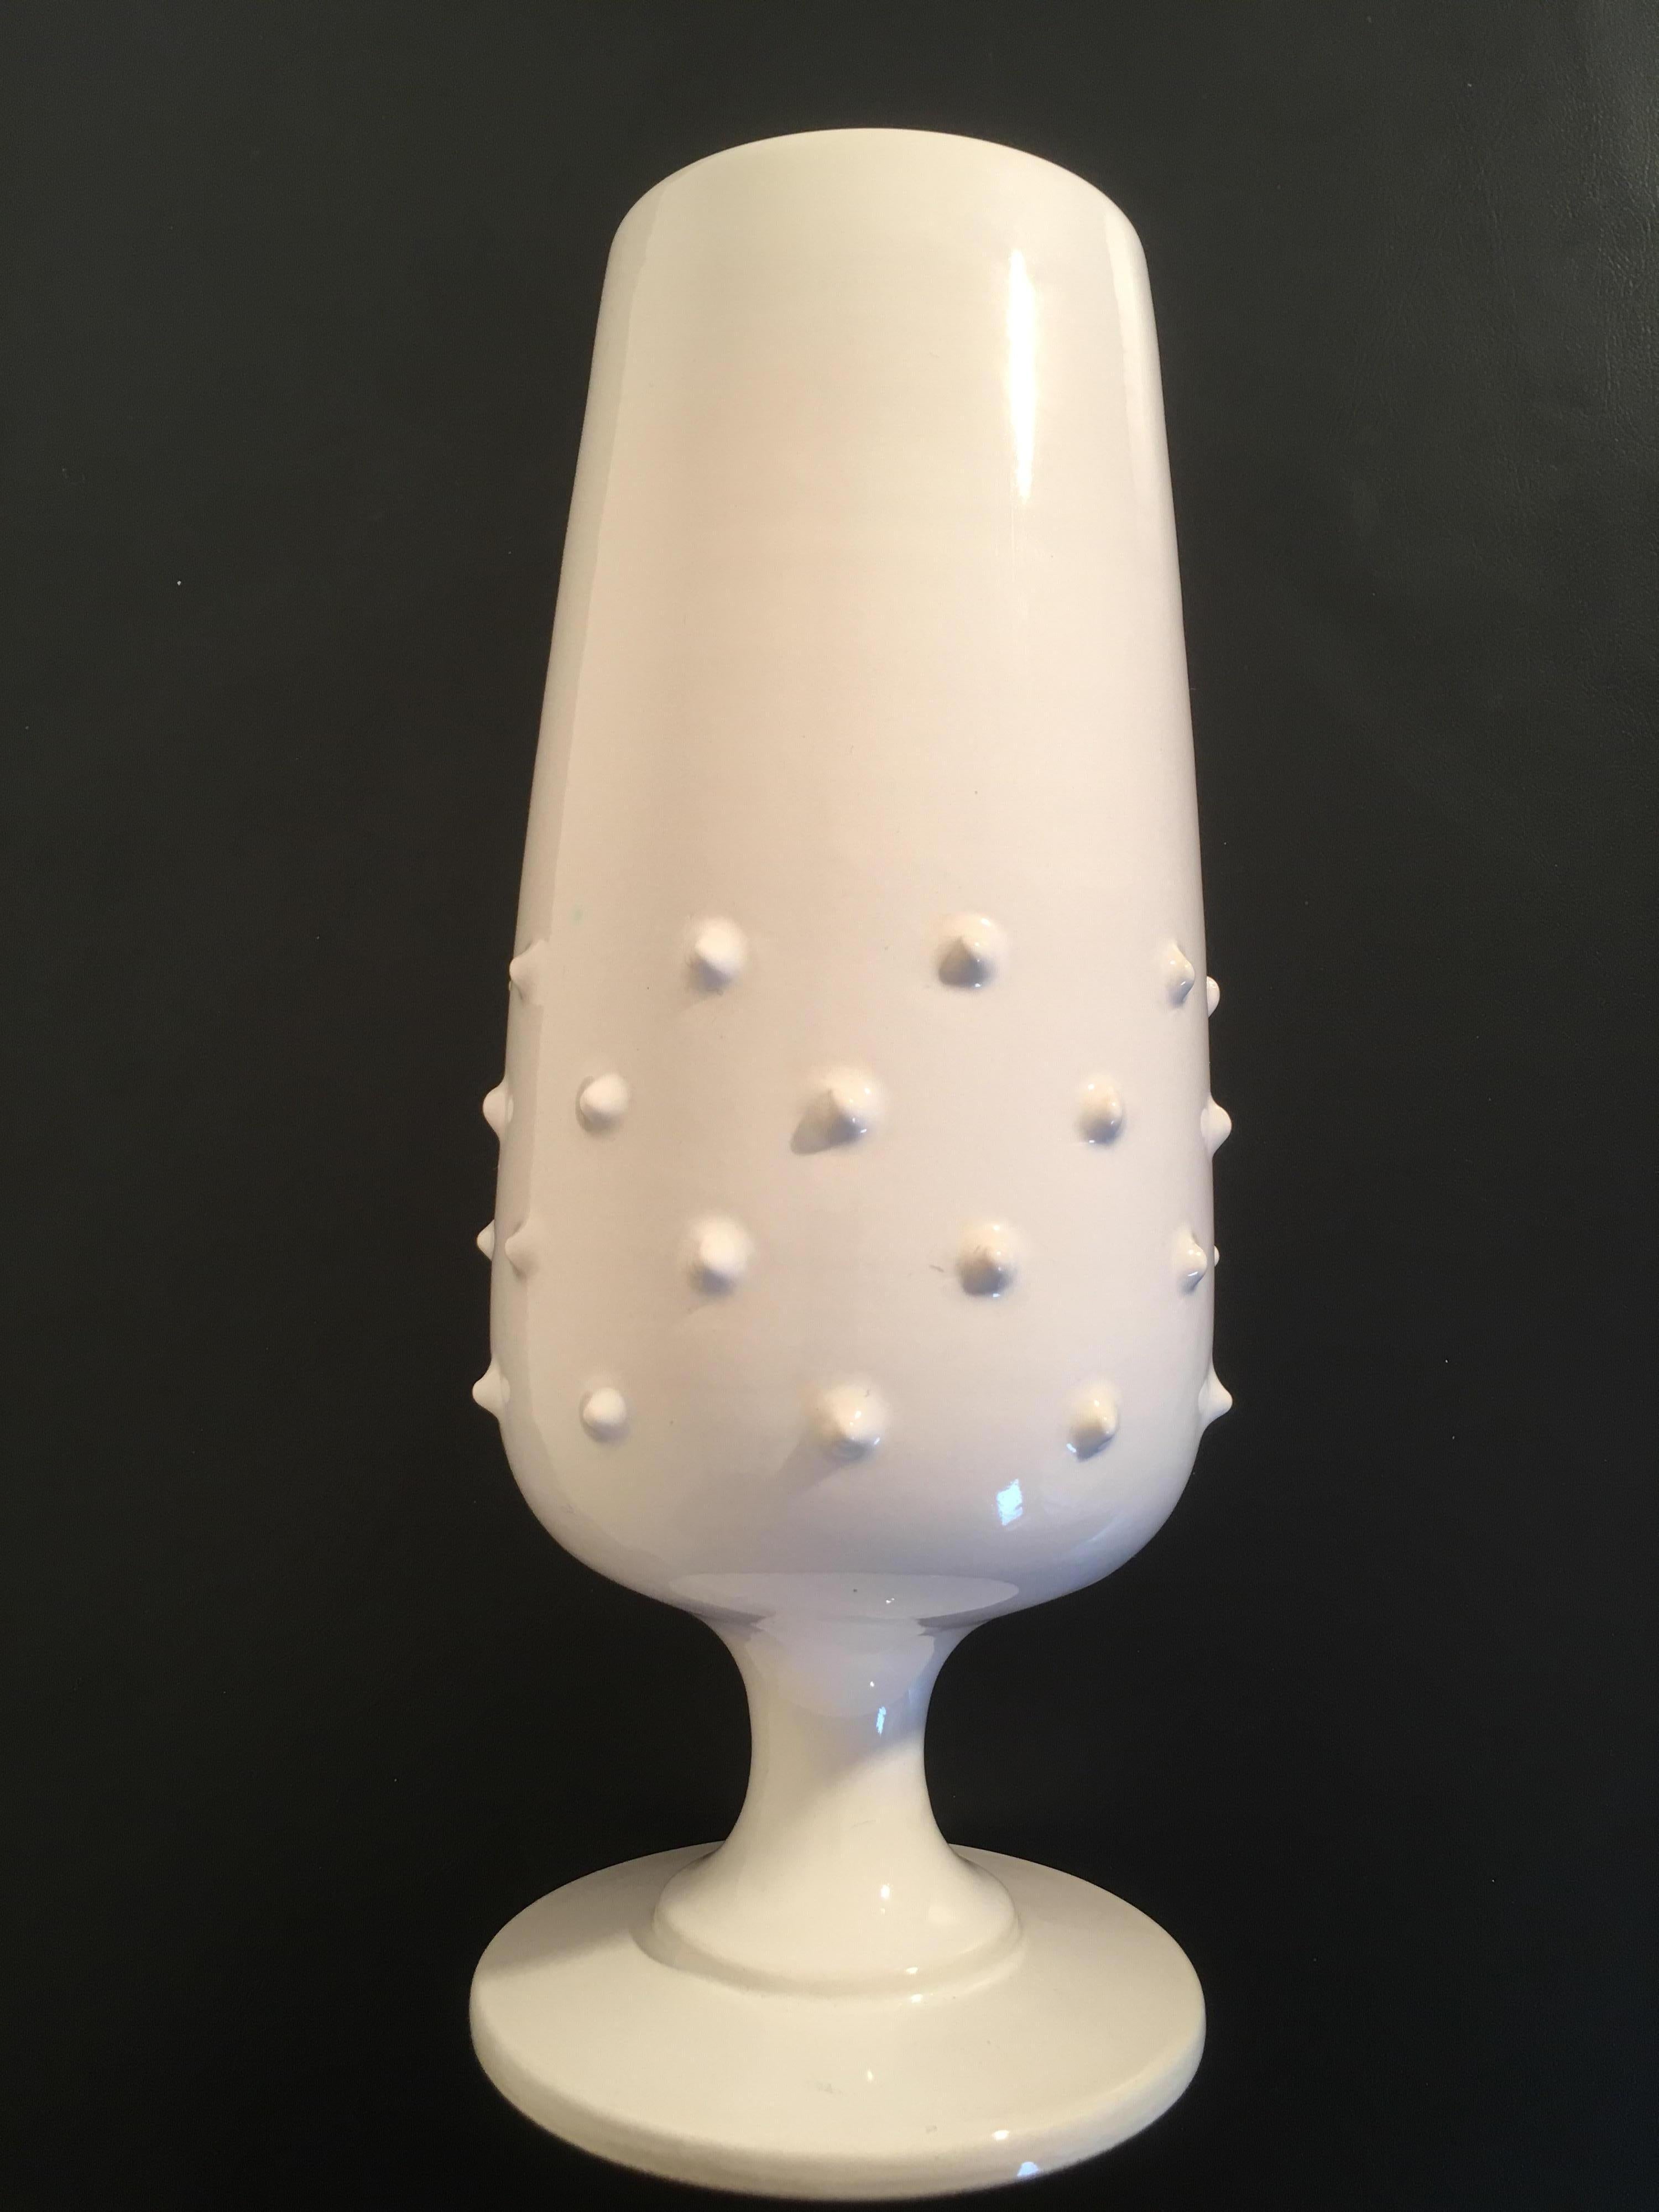 Elegant vase in white enameled earthenware made by Pol Chambost in France in 1950s.
Large model, calyx-shaped, with picot decoration.
Underside incised: Pol Chambost, France, 1240
In very good condition
Pol Chambost (1906-1983) is a famous